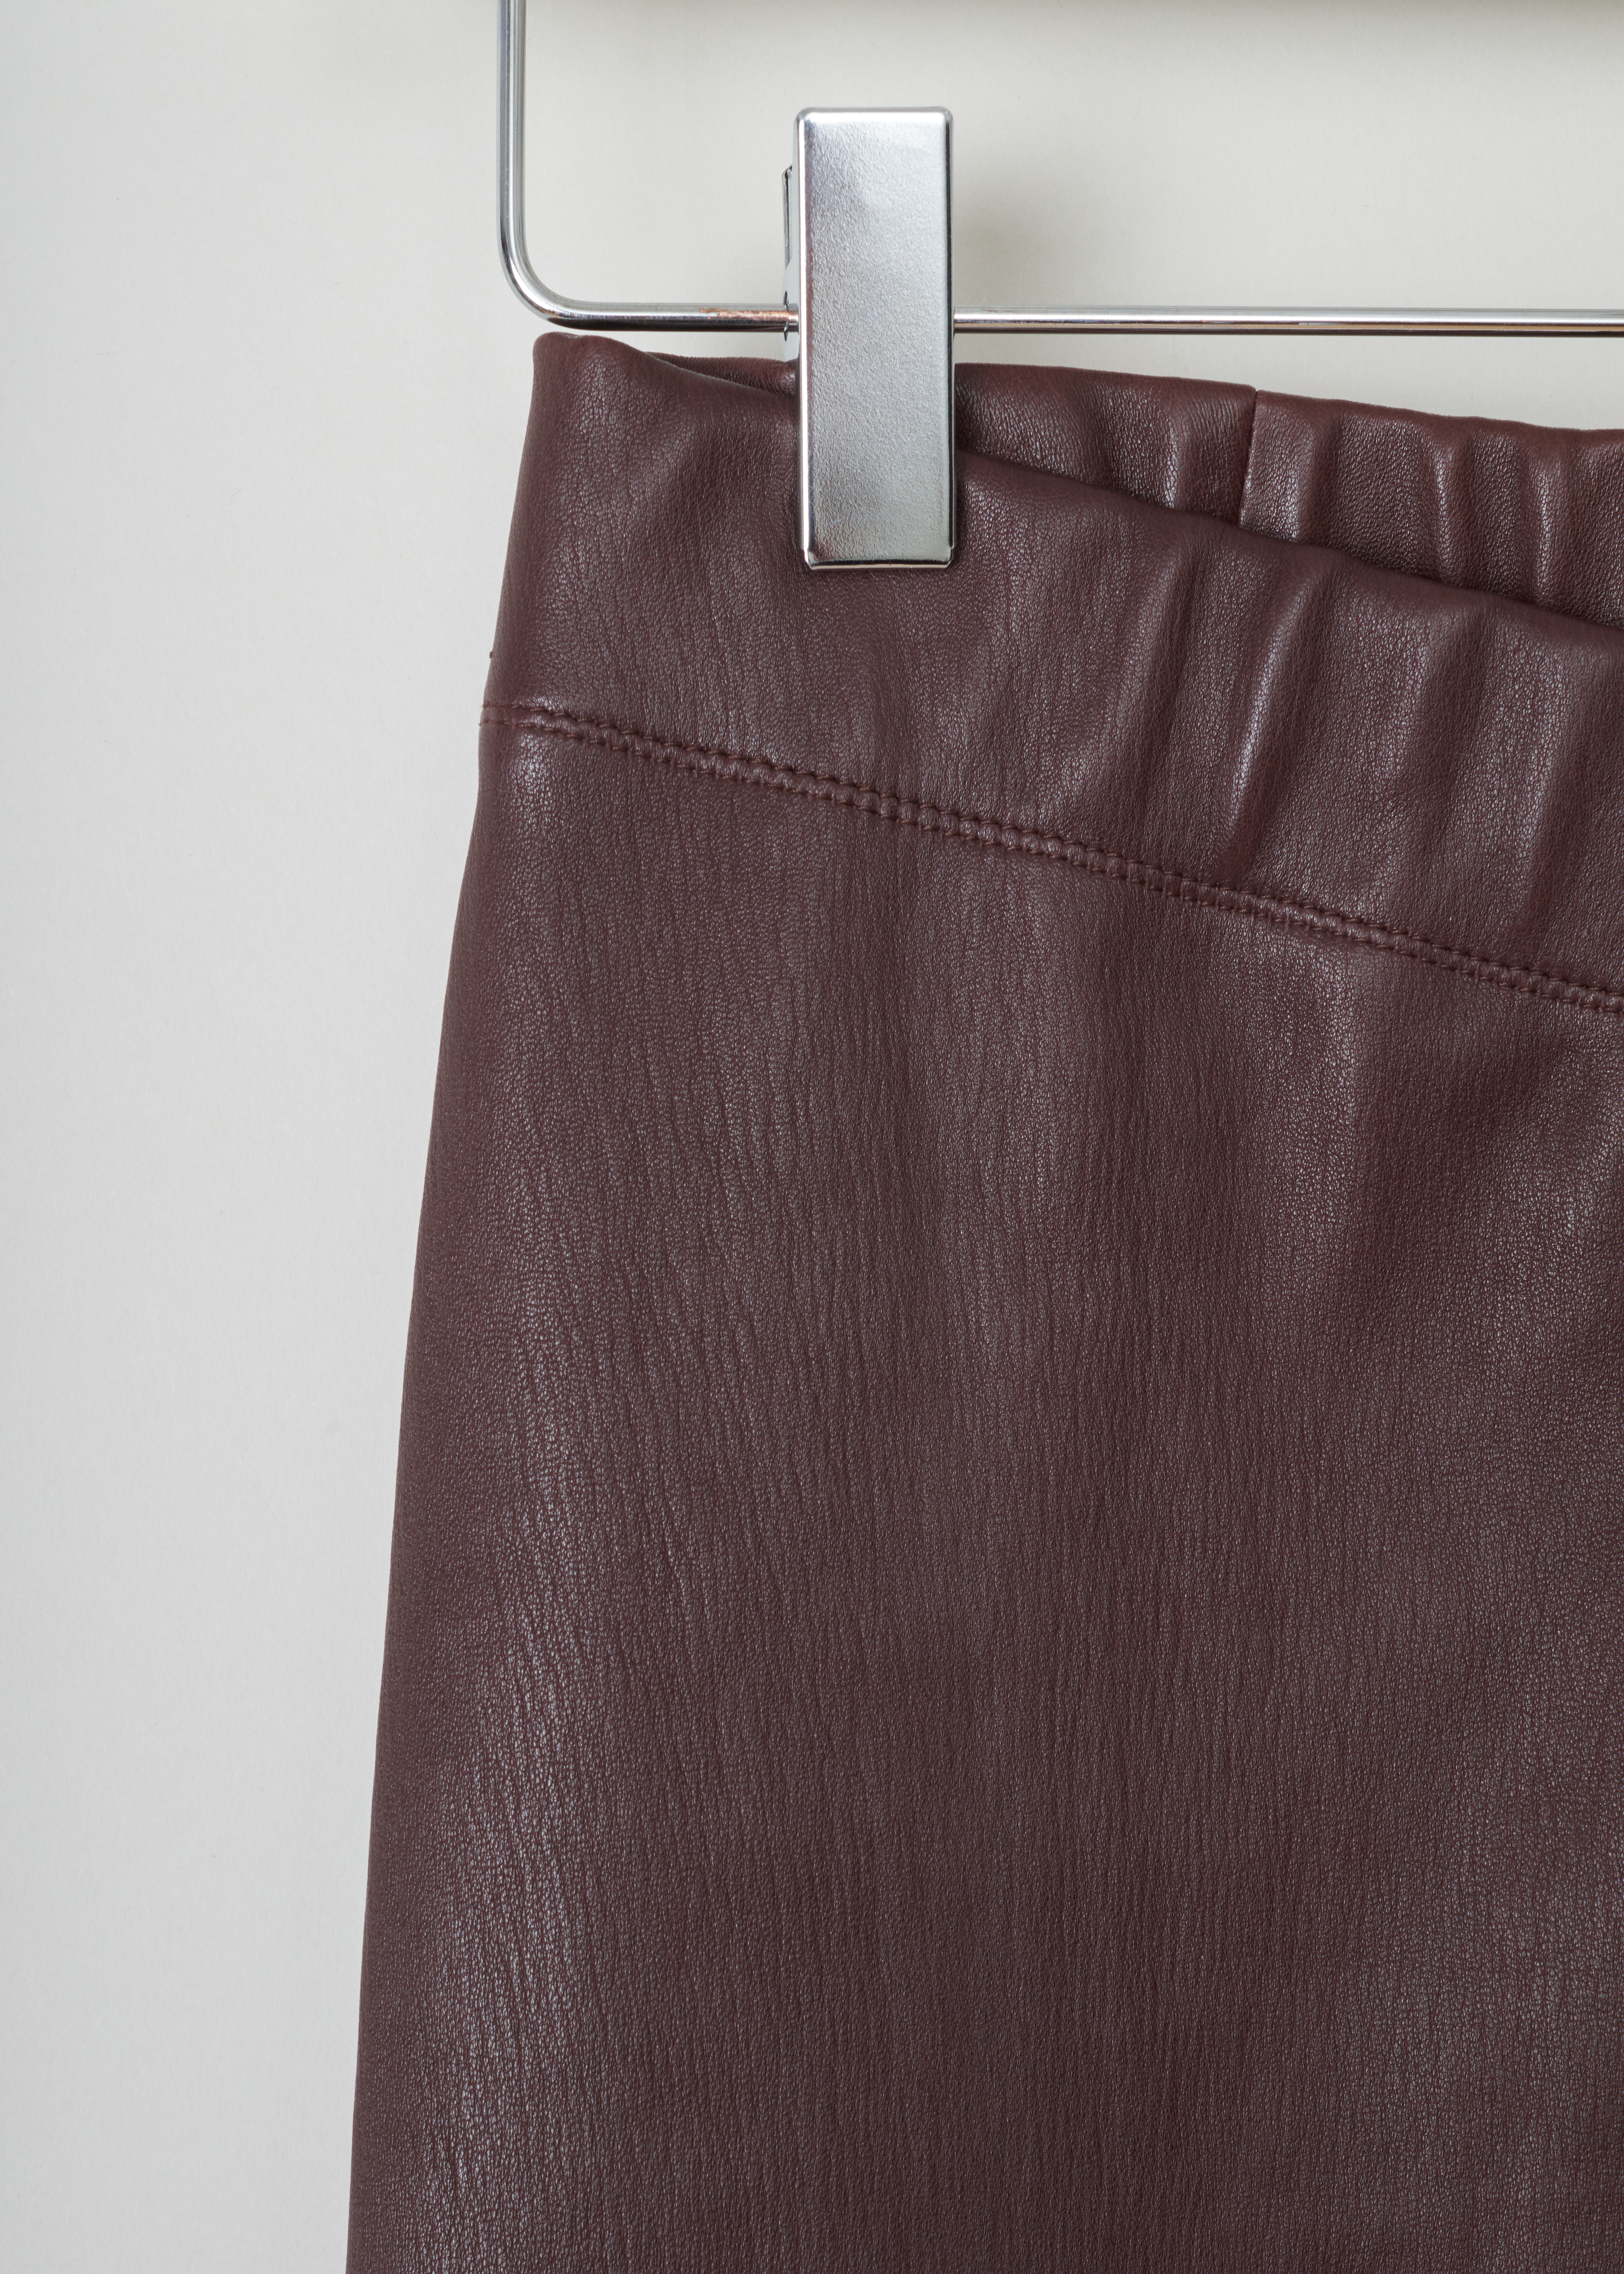 Brunello Cucinelli Elasticated leather Burgundy pants, M0V29P1329_C2630 burgundy detail. Fitted leather pants with a light stretch in it has an ankle-length and an elastic waistband.